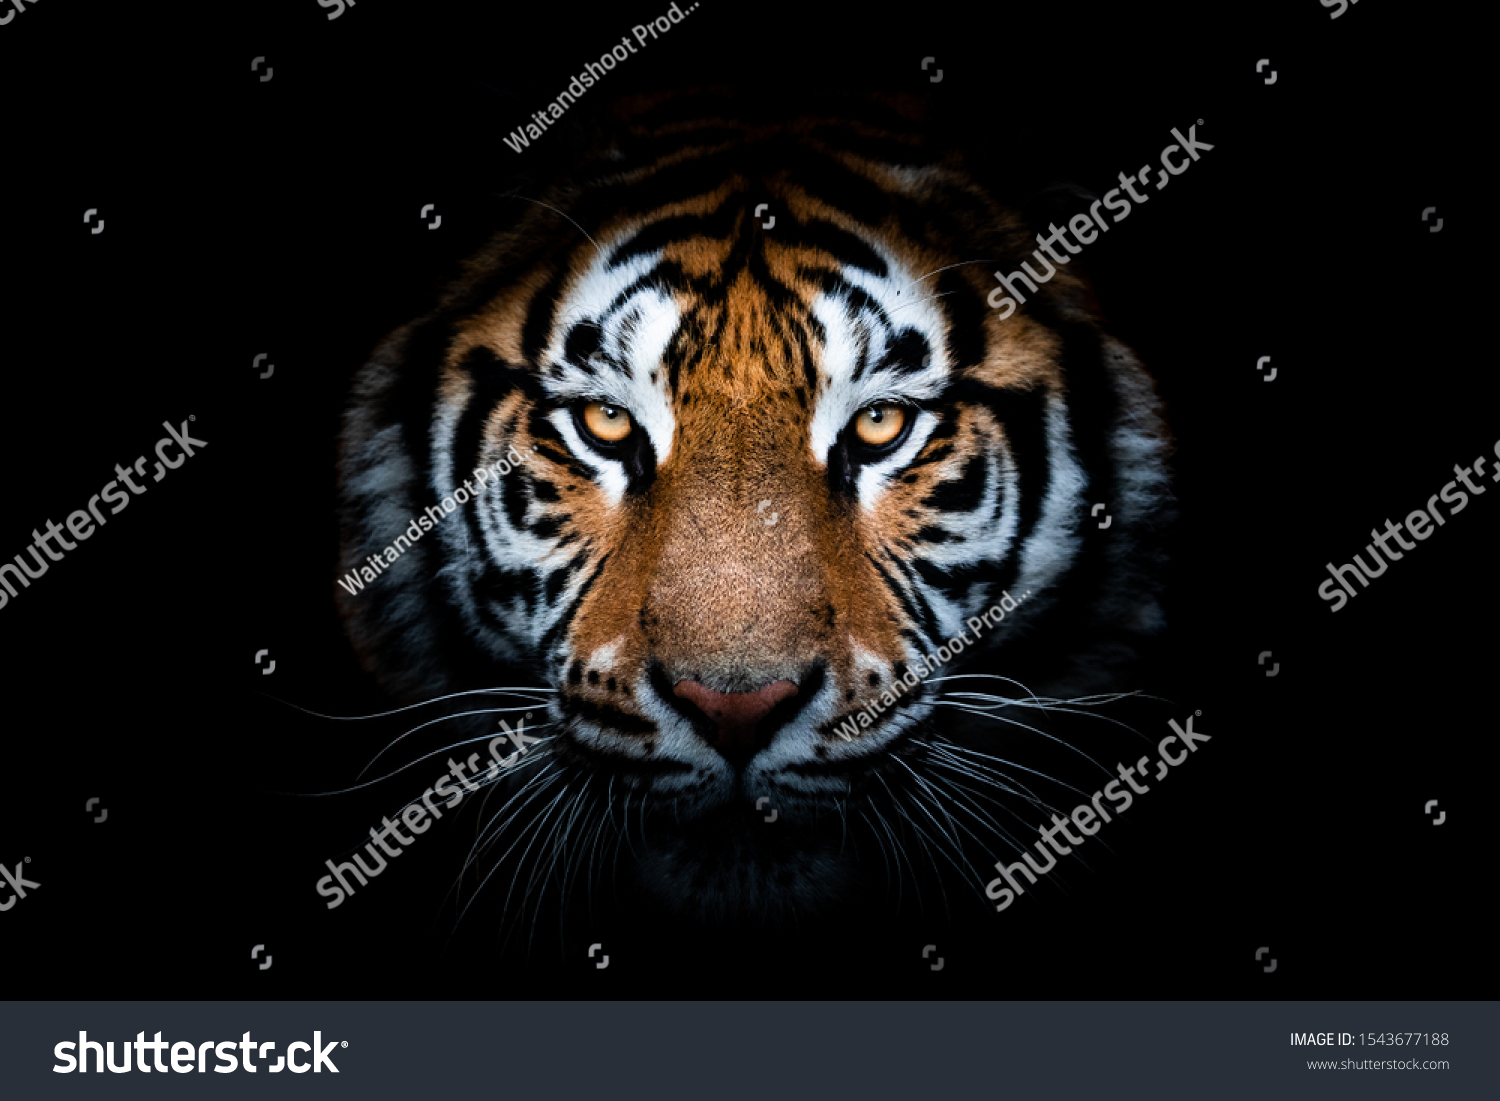 Portrait of a Tiger with a black background #1543677188